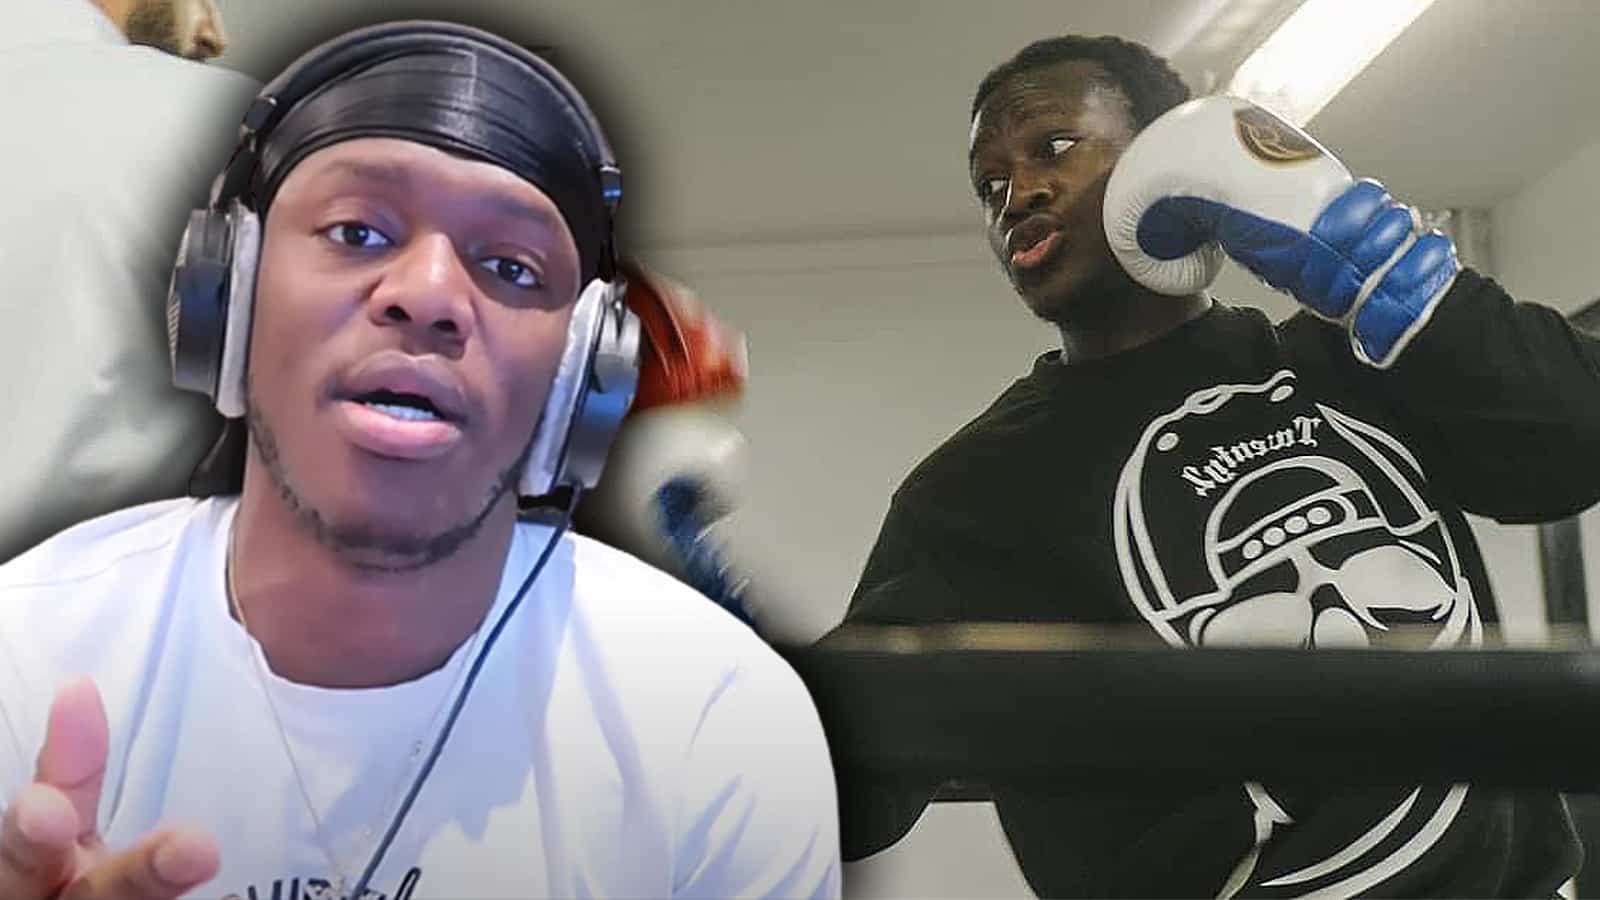 KSI admits hes “disappointed” with Deji over Alex Wassabi boxing loss